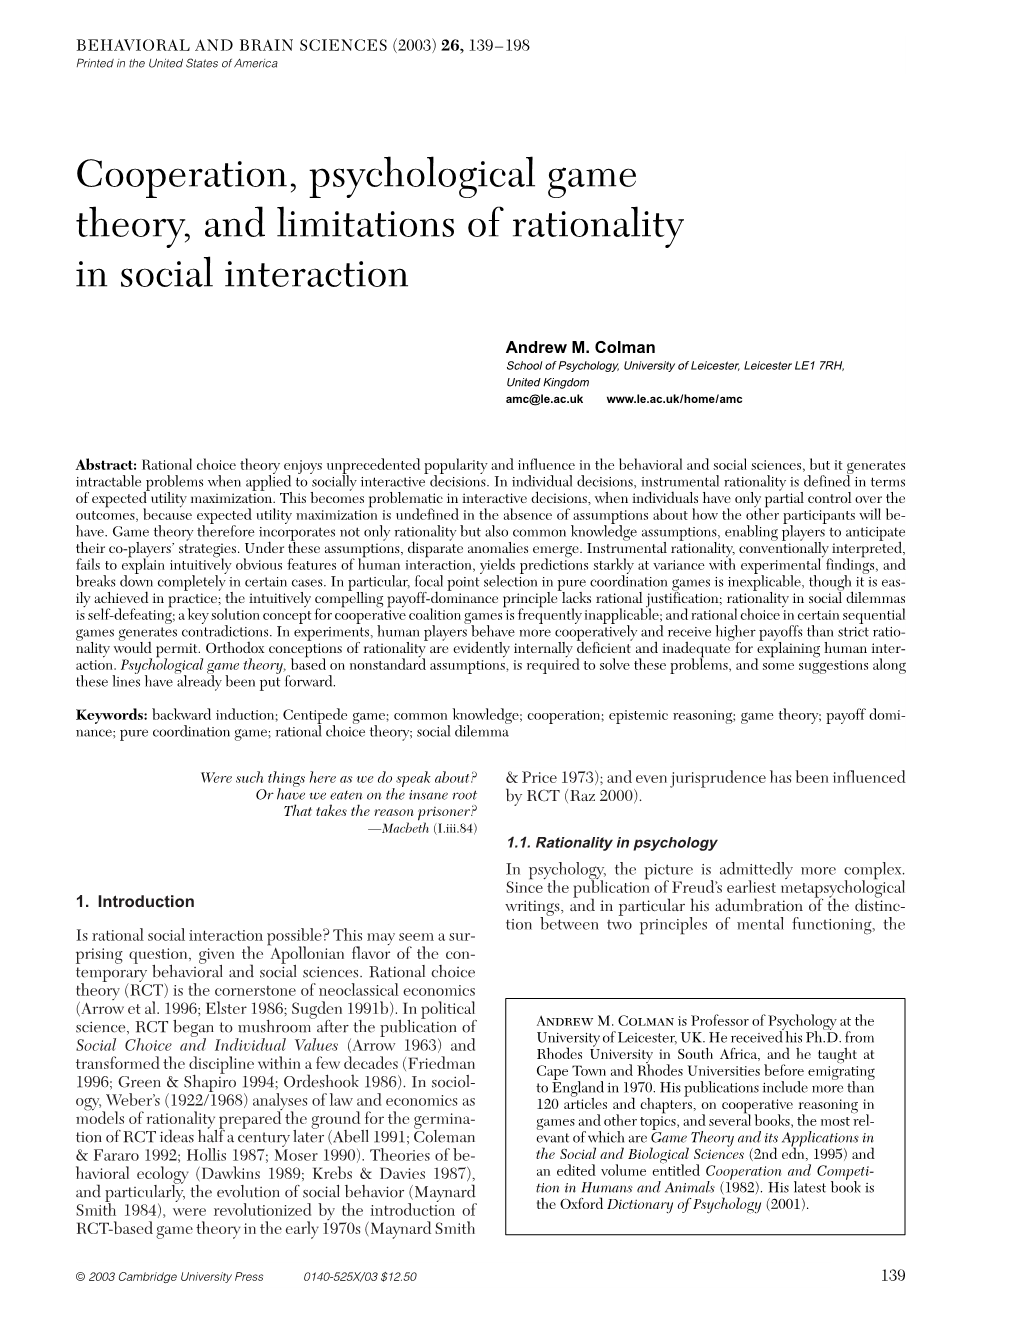 Cooperation, Psychological Game Theory, and Limitations of Rationality in Social Interaction